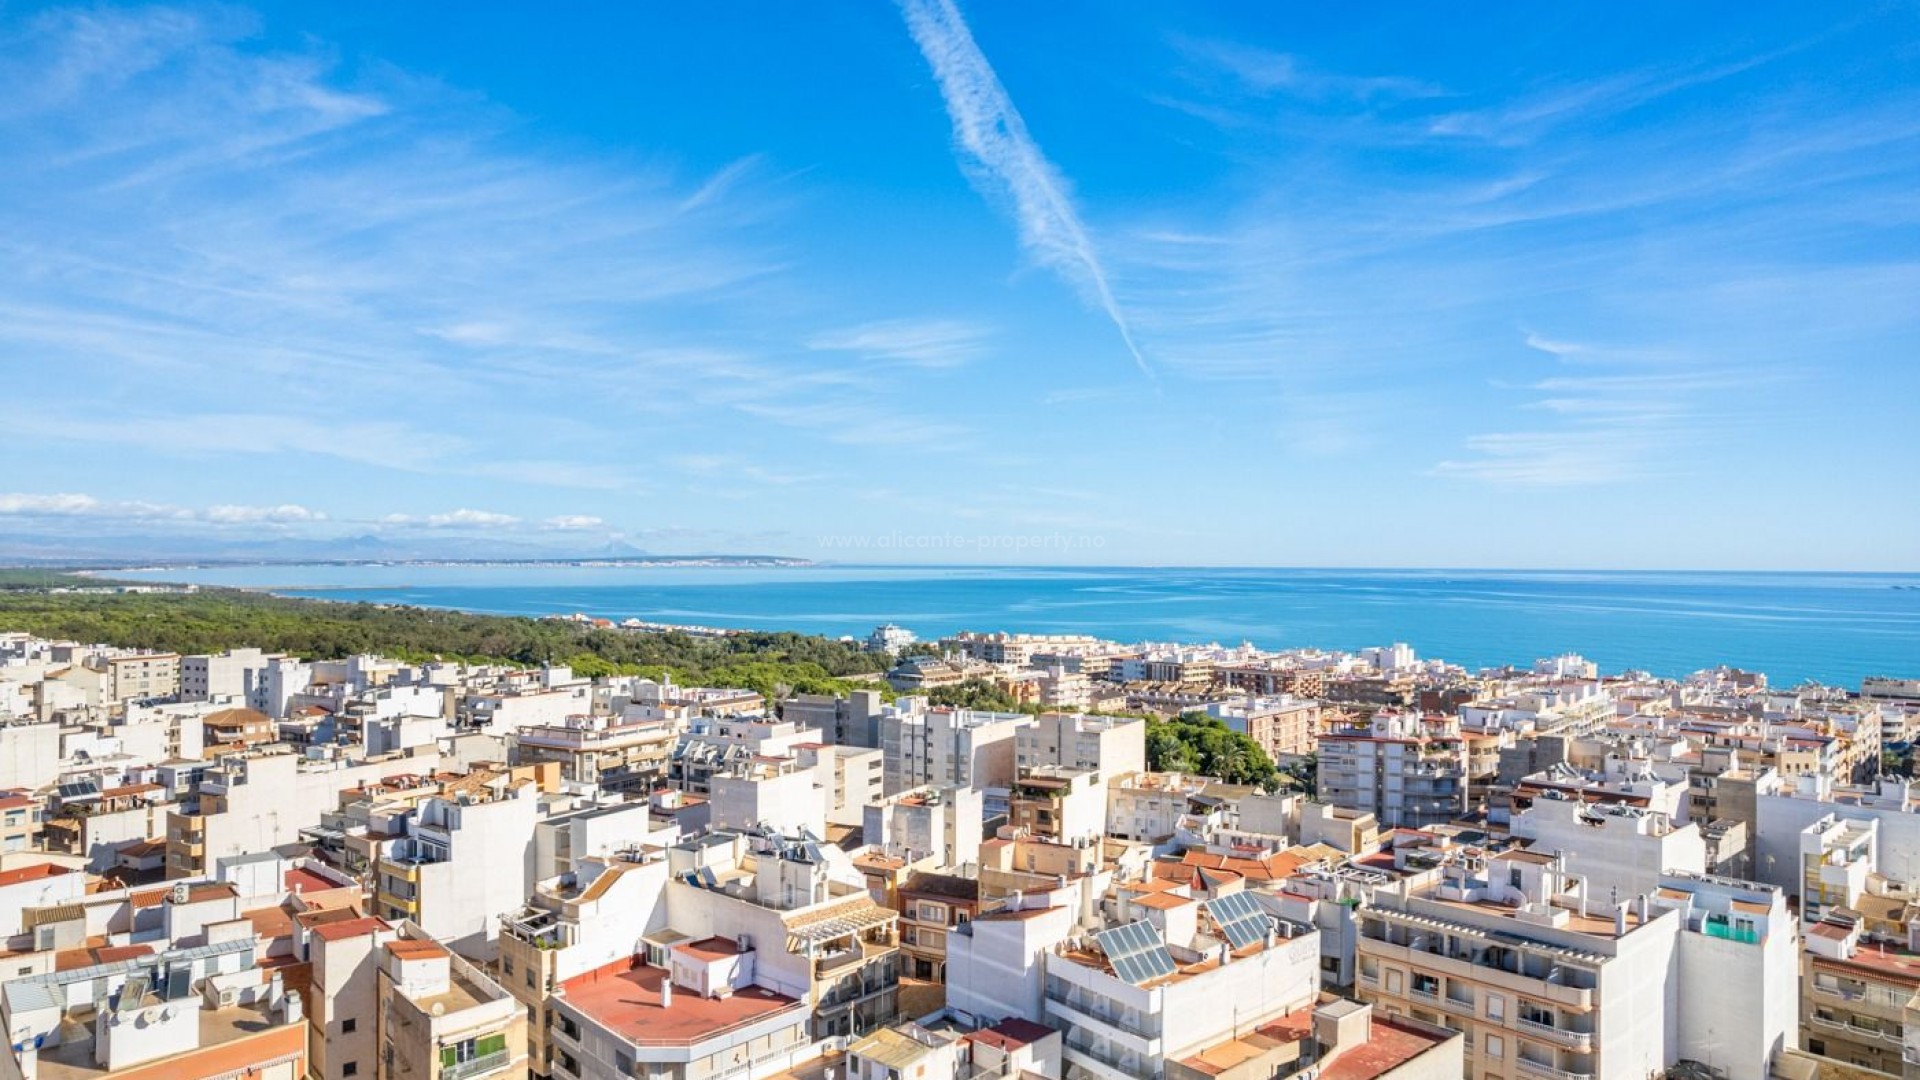 Apartments near the beach in Guardamar de Segura, 2/3 bedrooms, 2 bathrooms, large terraces, all with private solarium and storage room, underground parking